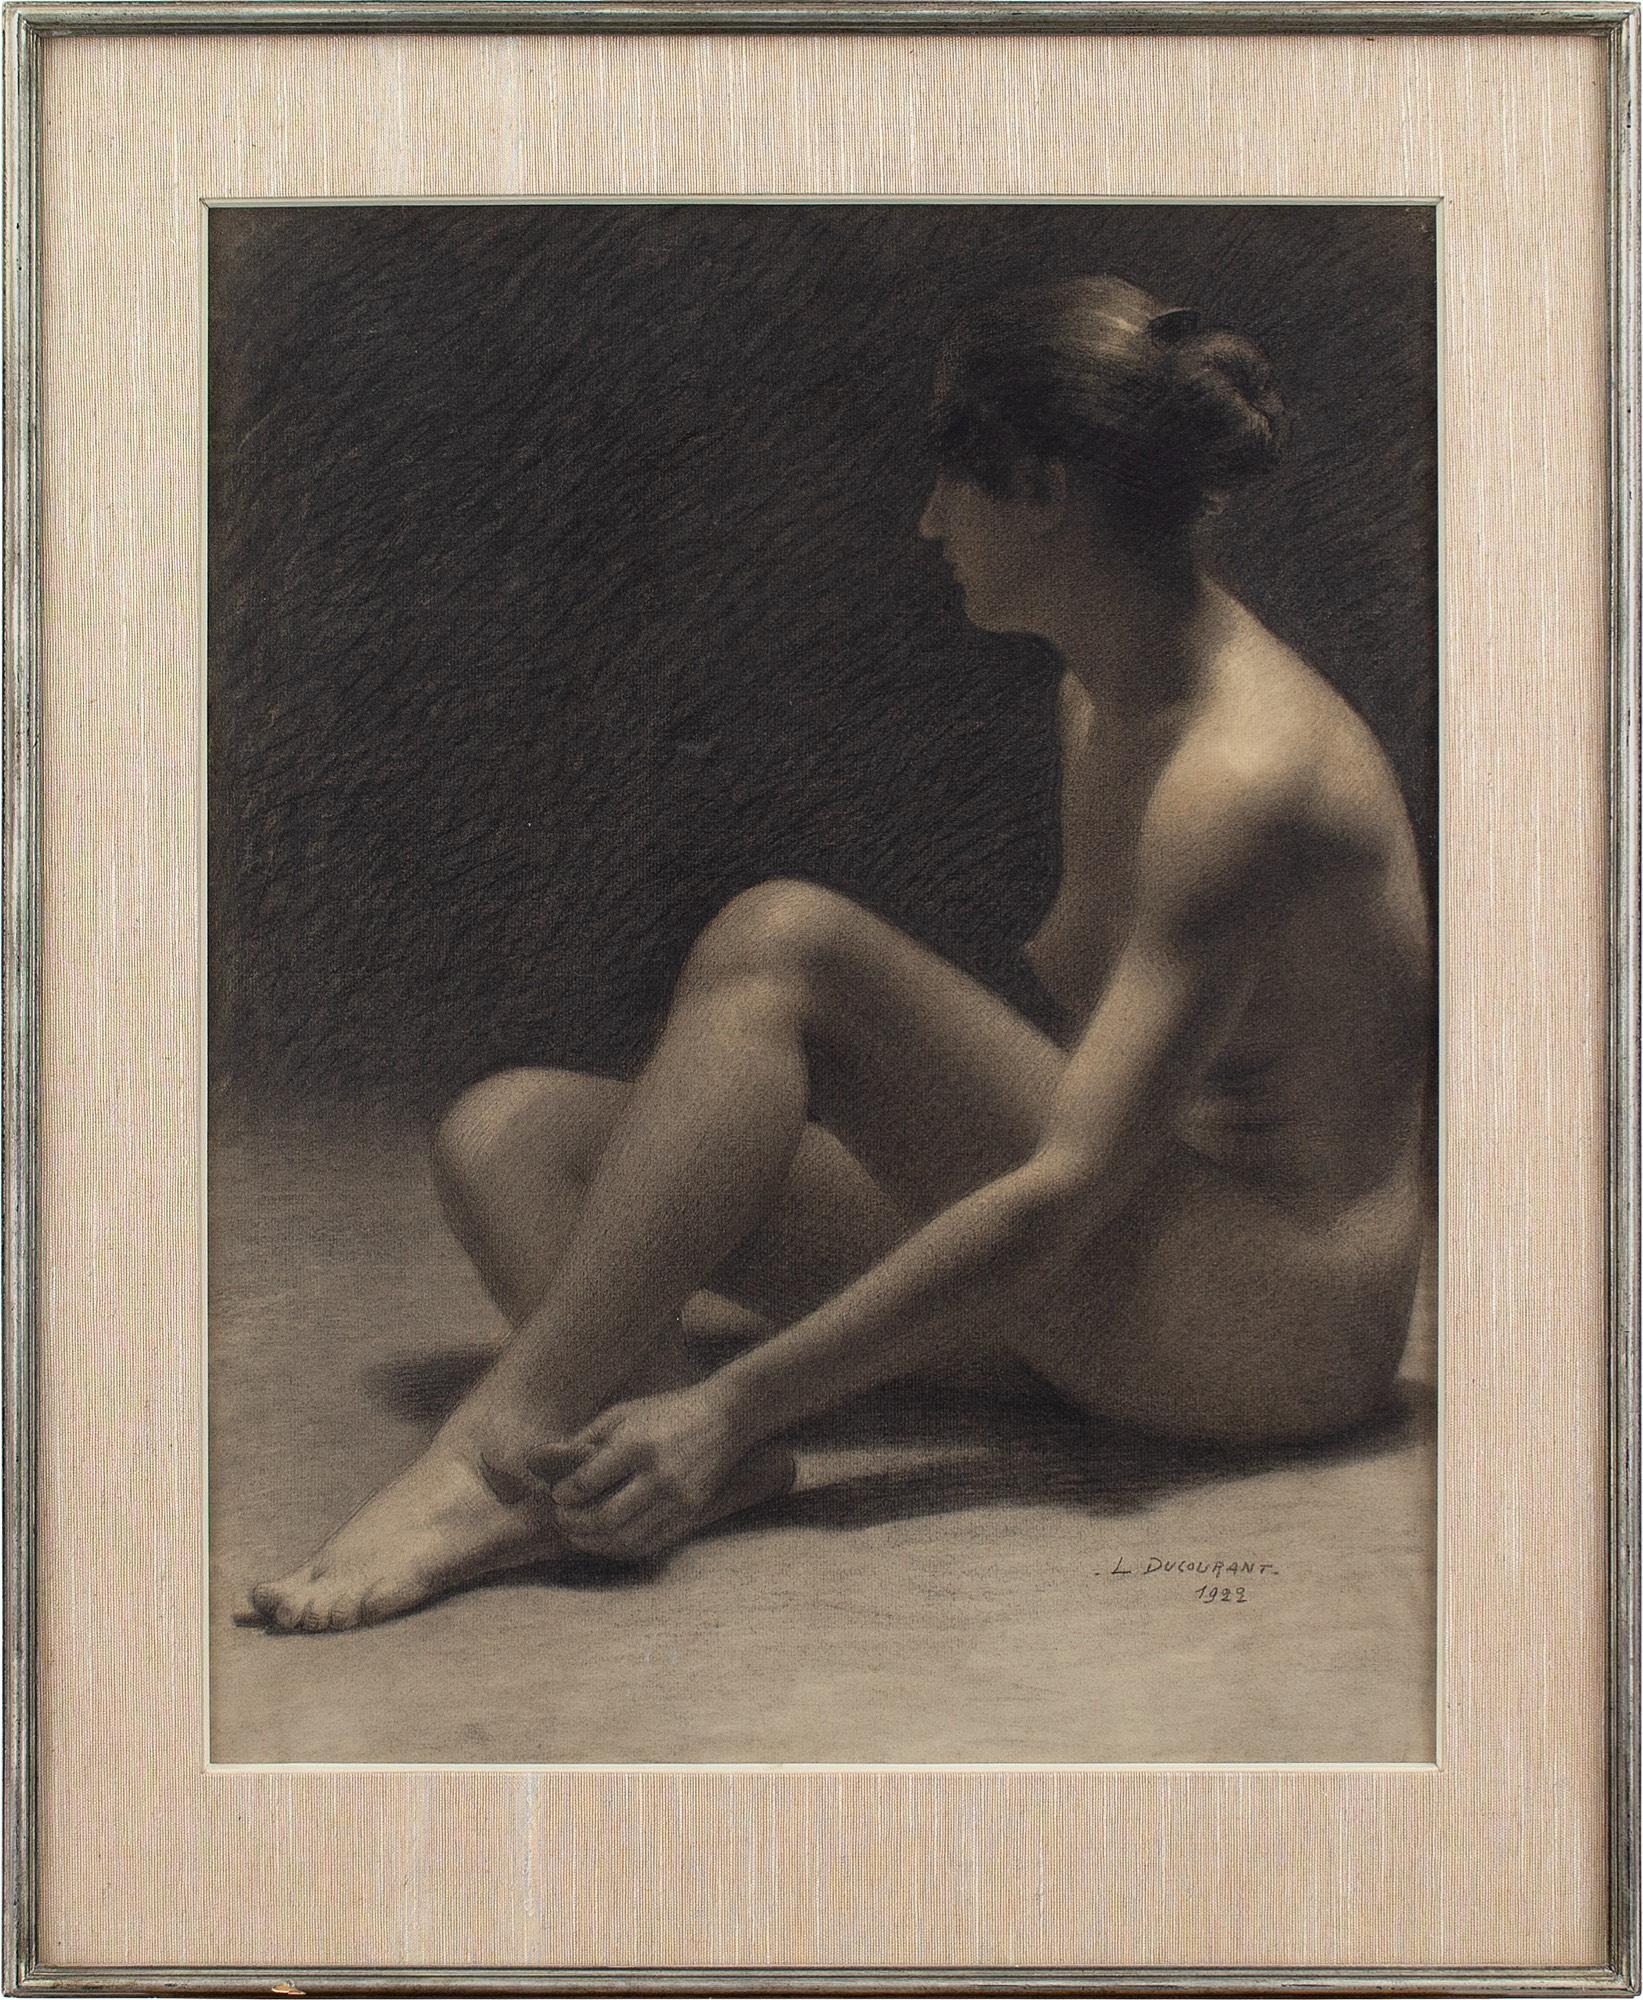 This early 20th-century charcoal drawing by L Ducourant depicts a seated nude in profile. It’s exquisitely rendered with keen attention to the effects of the light.

Every now and then, we discover a piece by an unknown artist that carries such an